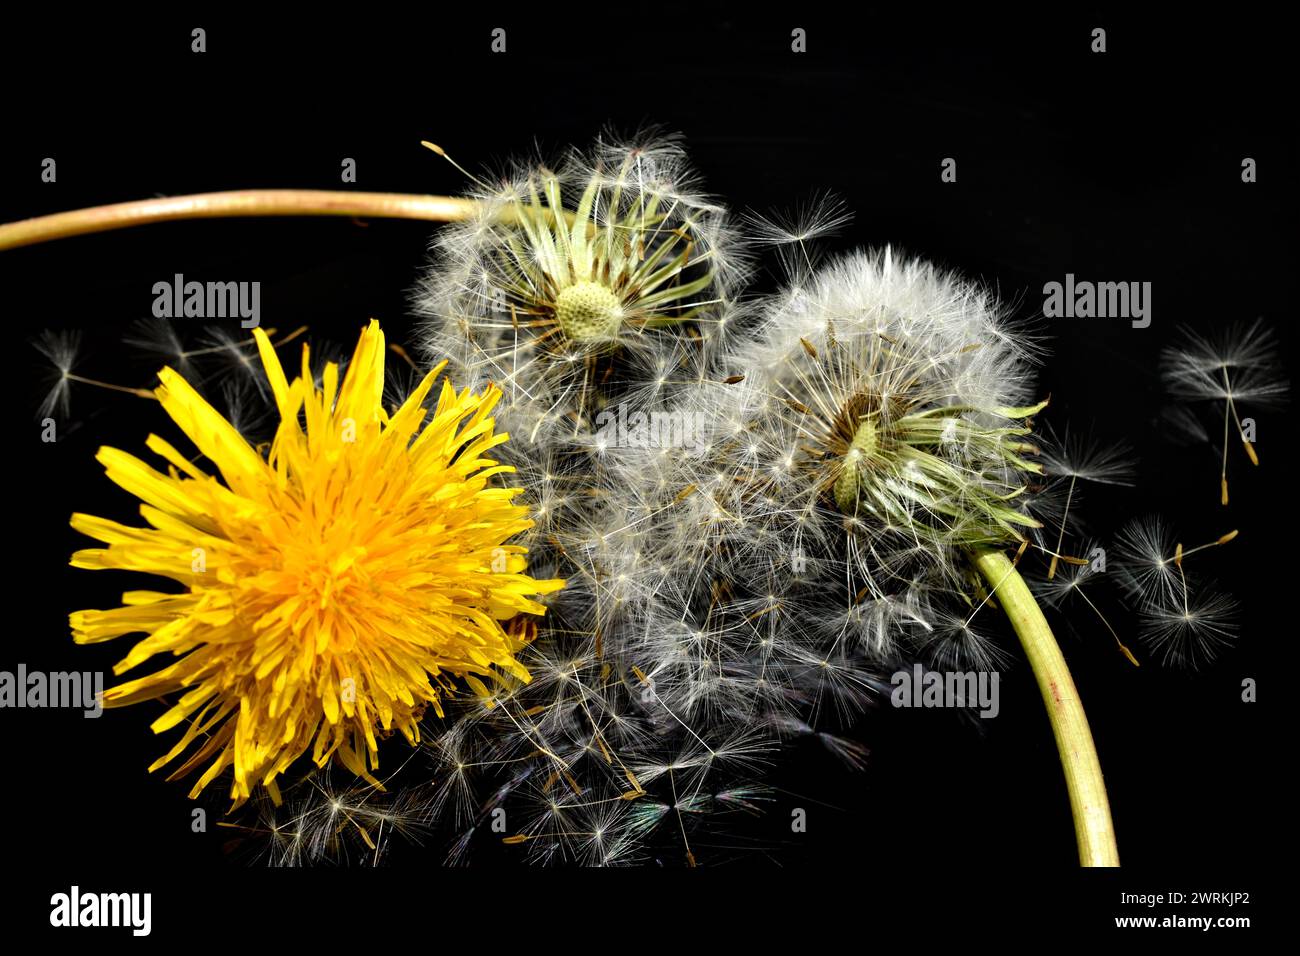 Two stages of a dandelion flower. A flower that only blooms yellow and with ripe seeds, with umbrellas. Stock Photo